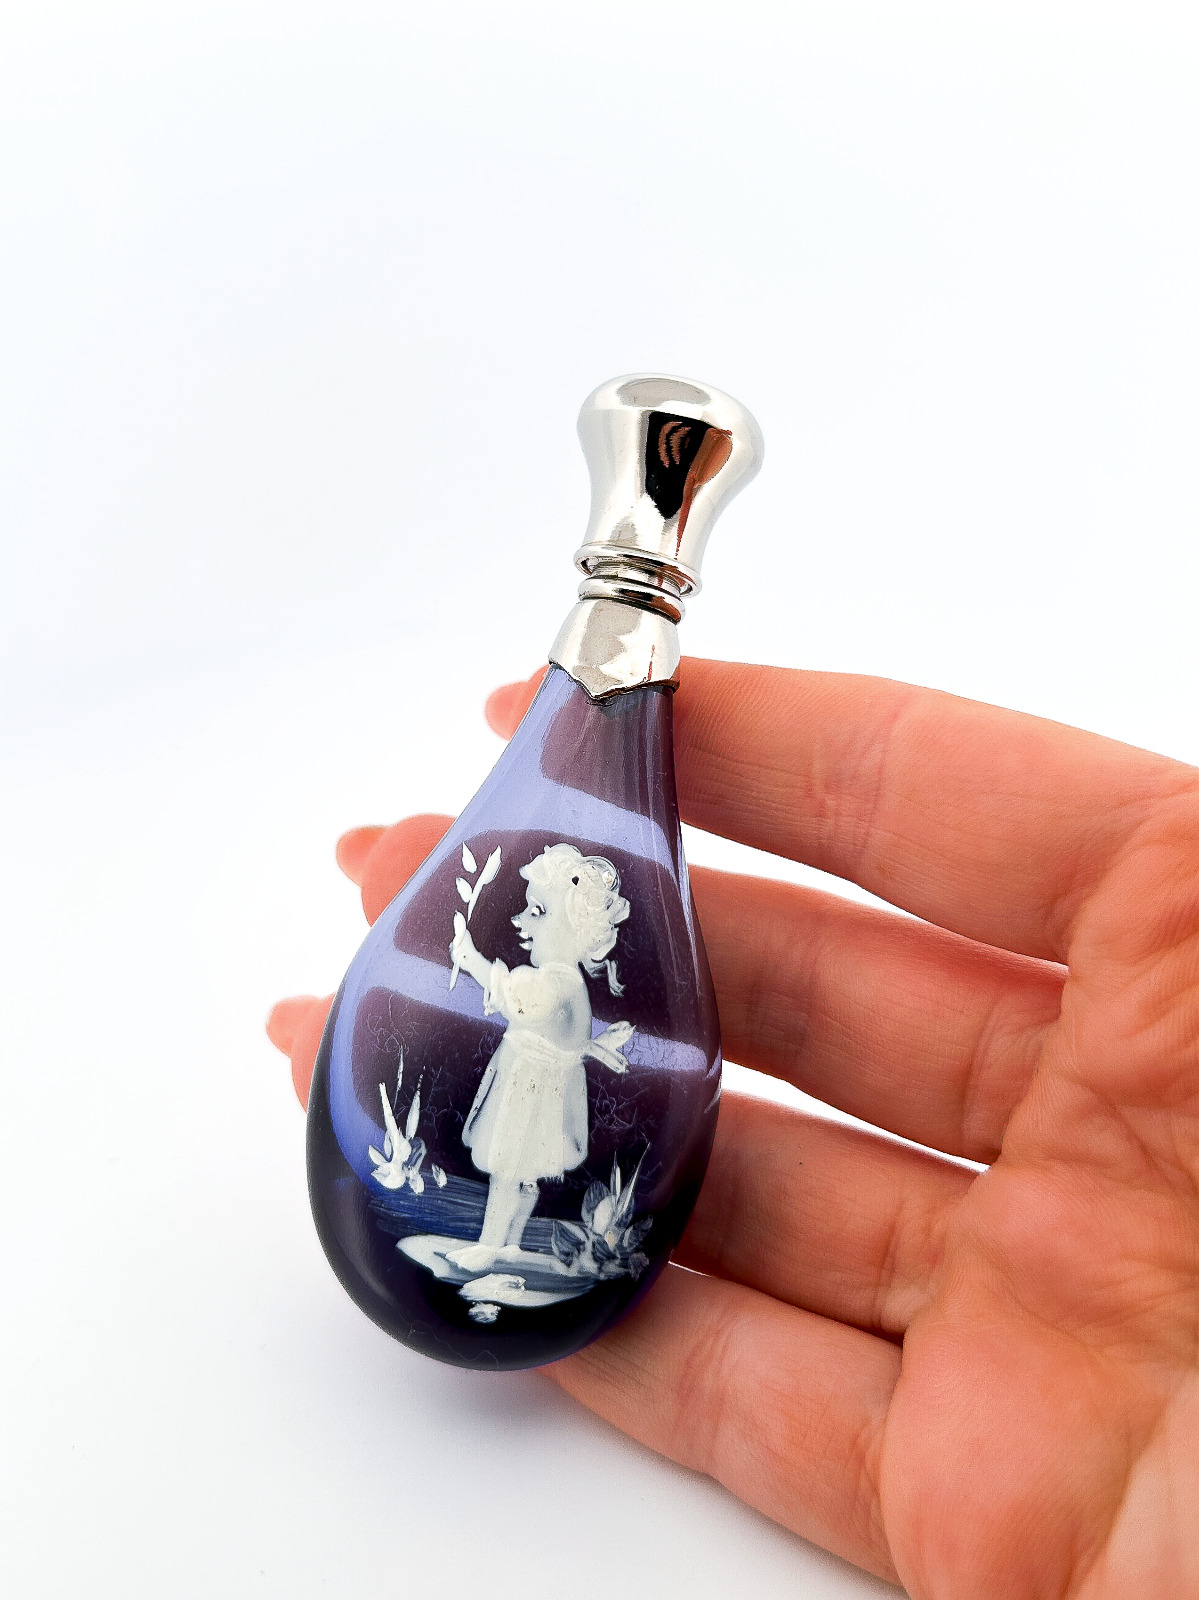 A Faceted Vintage Victorian Style Blue Novelty Perfume Bottle with Painted Girl